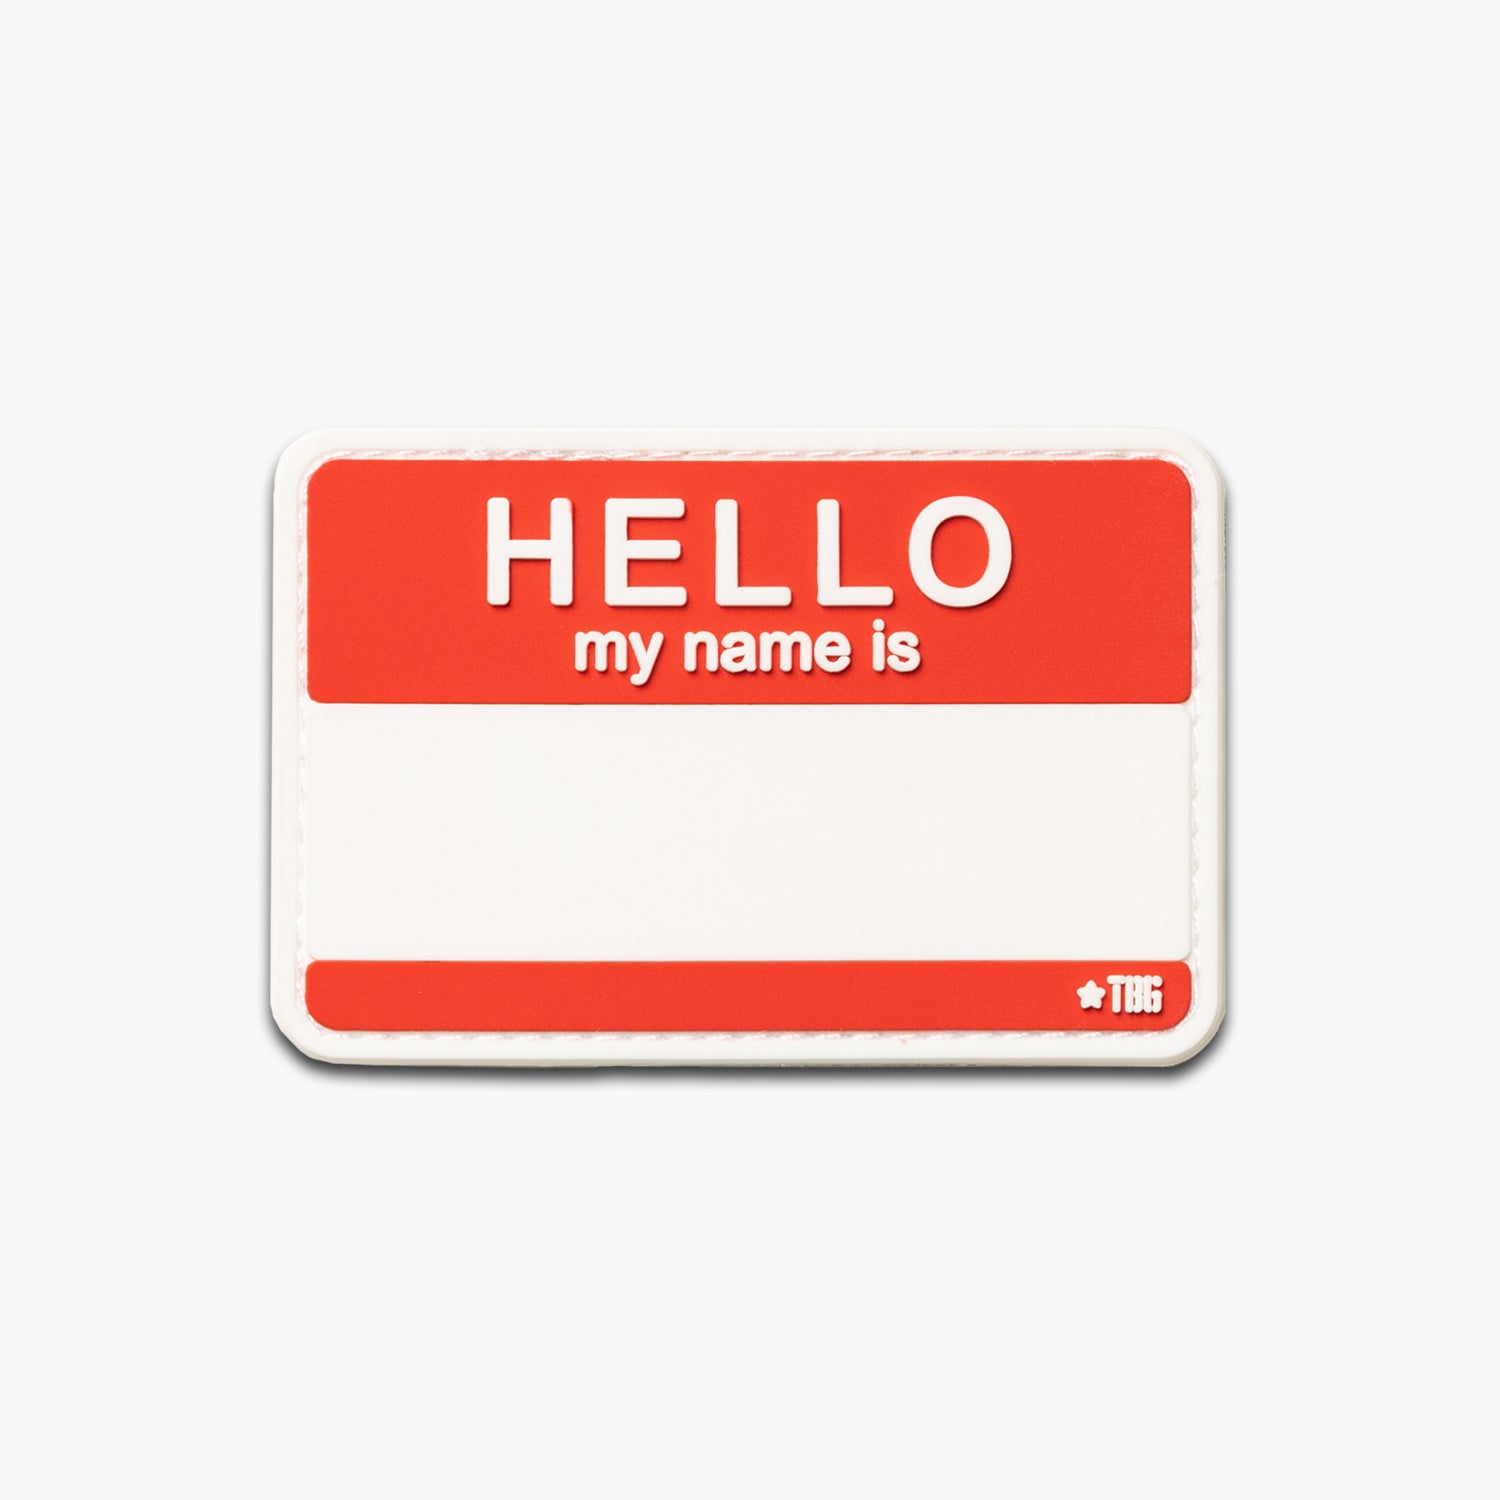 Hello My Name is That Guy Funny Iron on Patch - Iron on Funny Patches by  Ivamis Patches